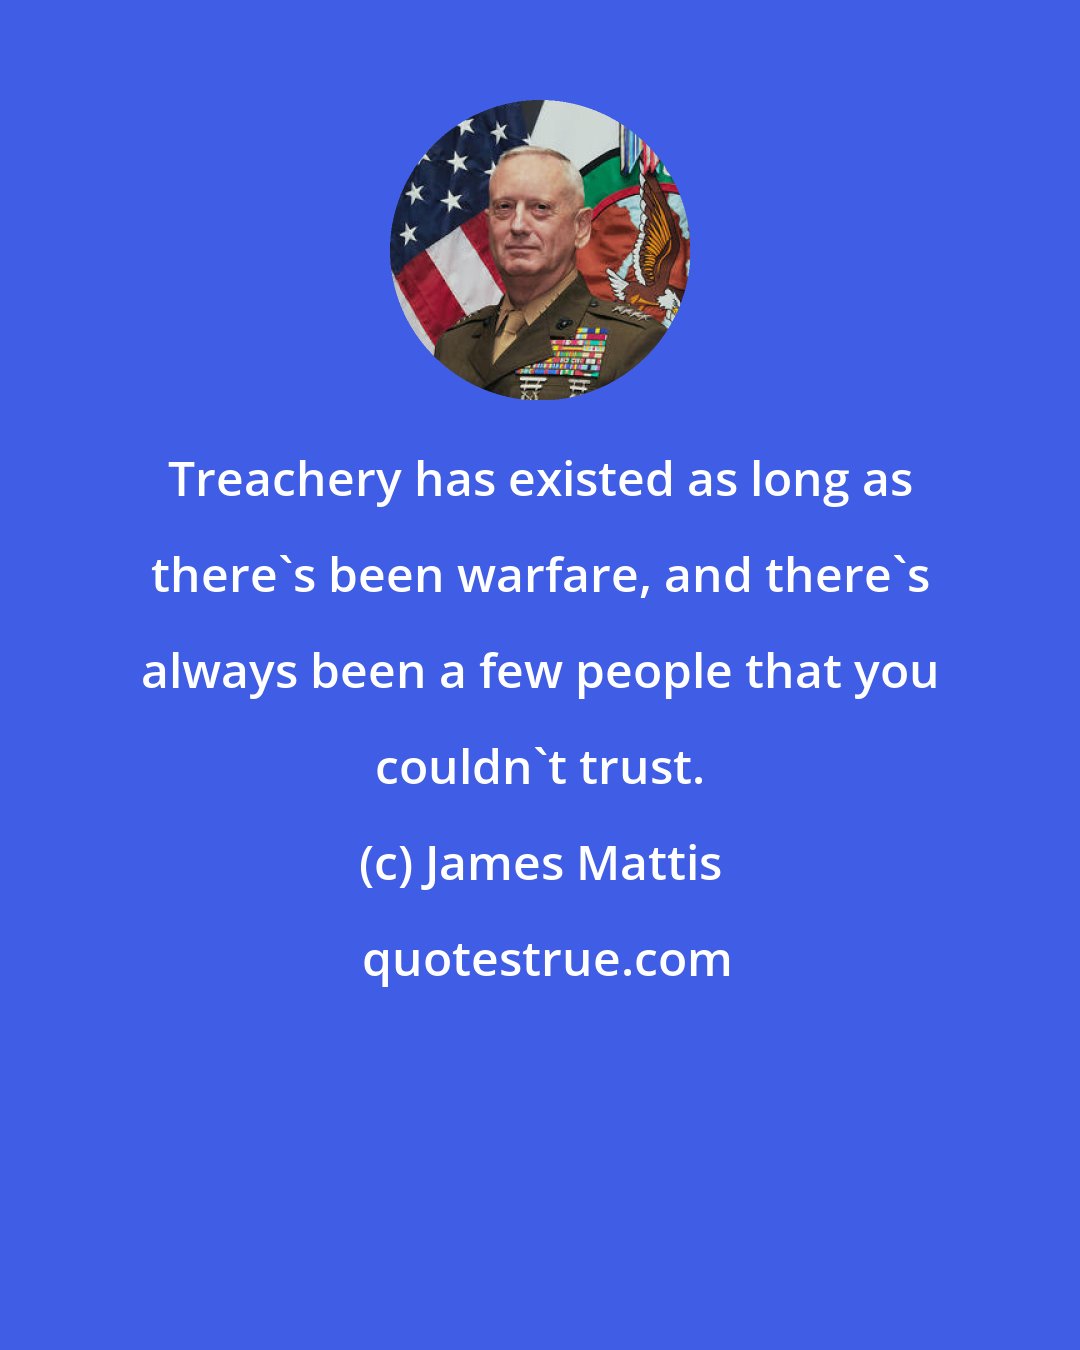 James Mattis: Treachery has existed as long as there's been warfare, and there's always been a few people that you couldn't trust.